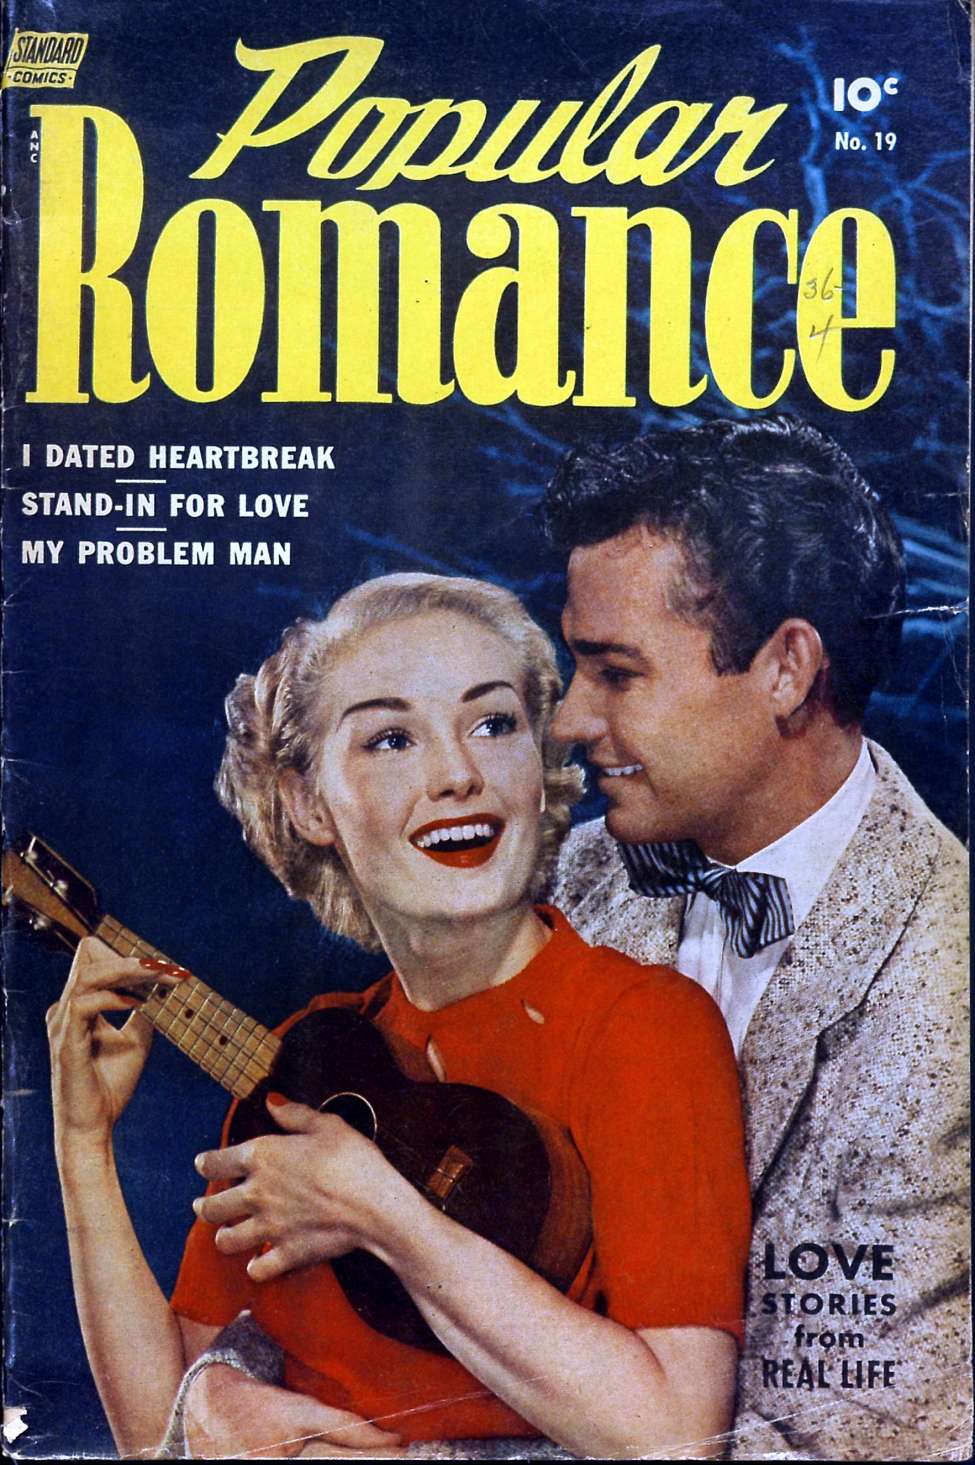 Comic Book Cover For Popular Romance 19